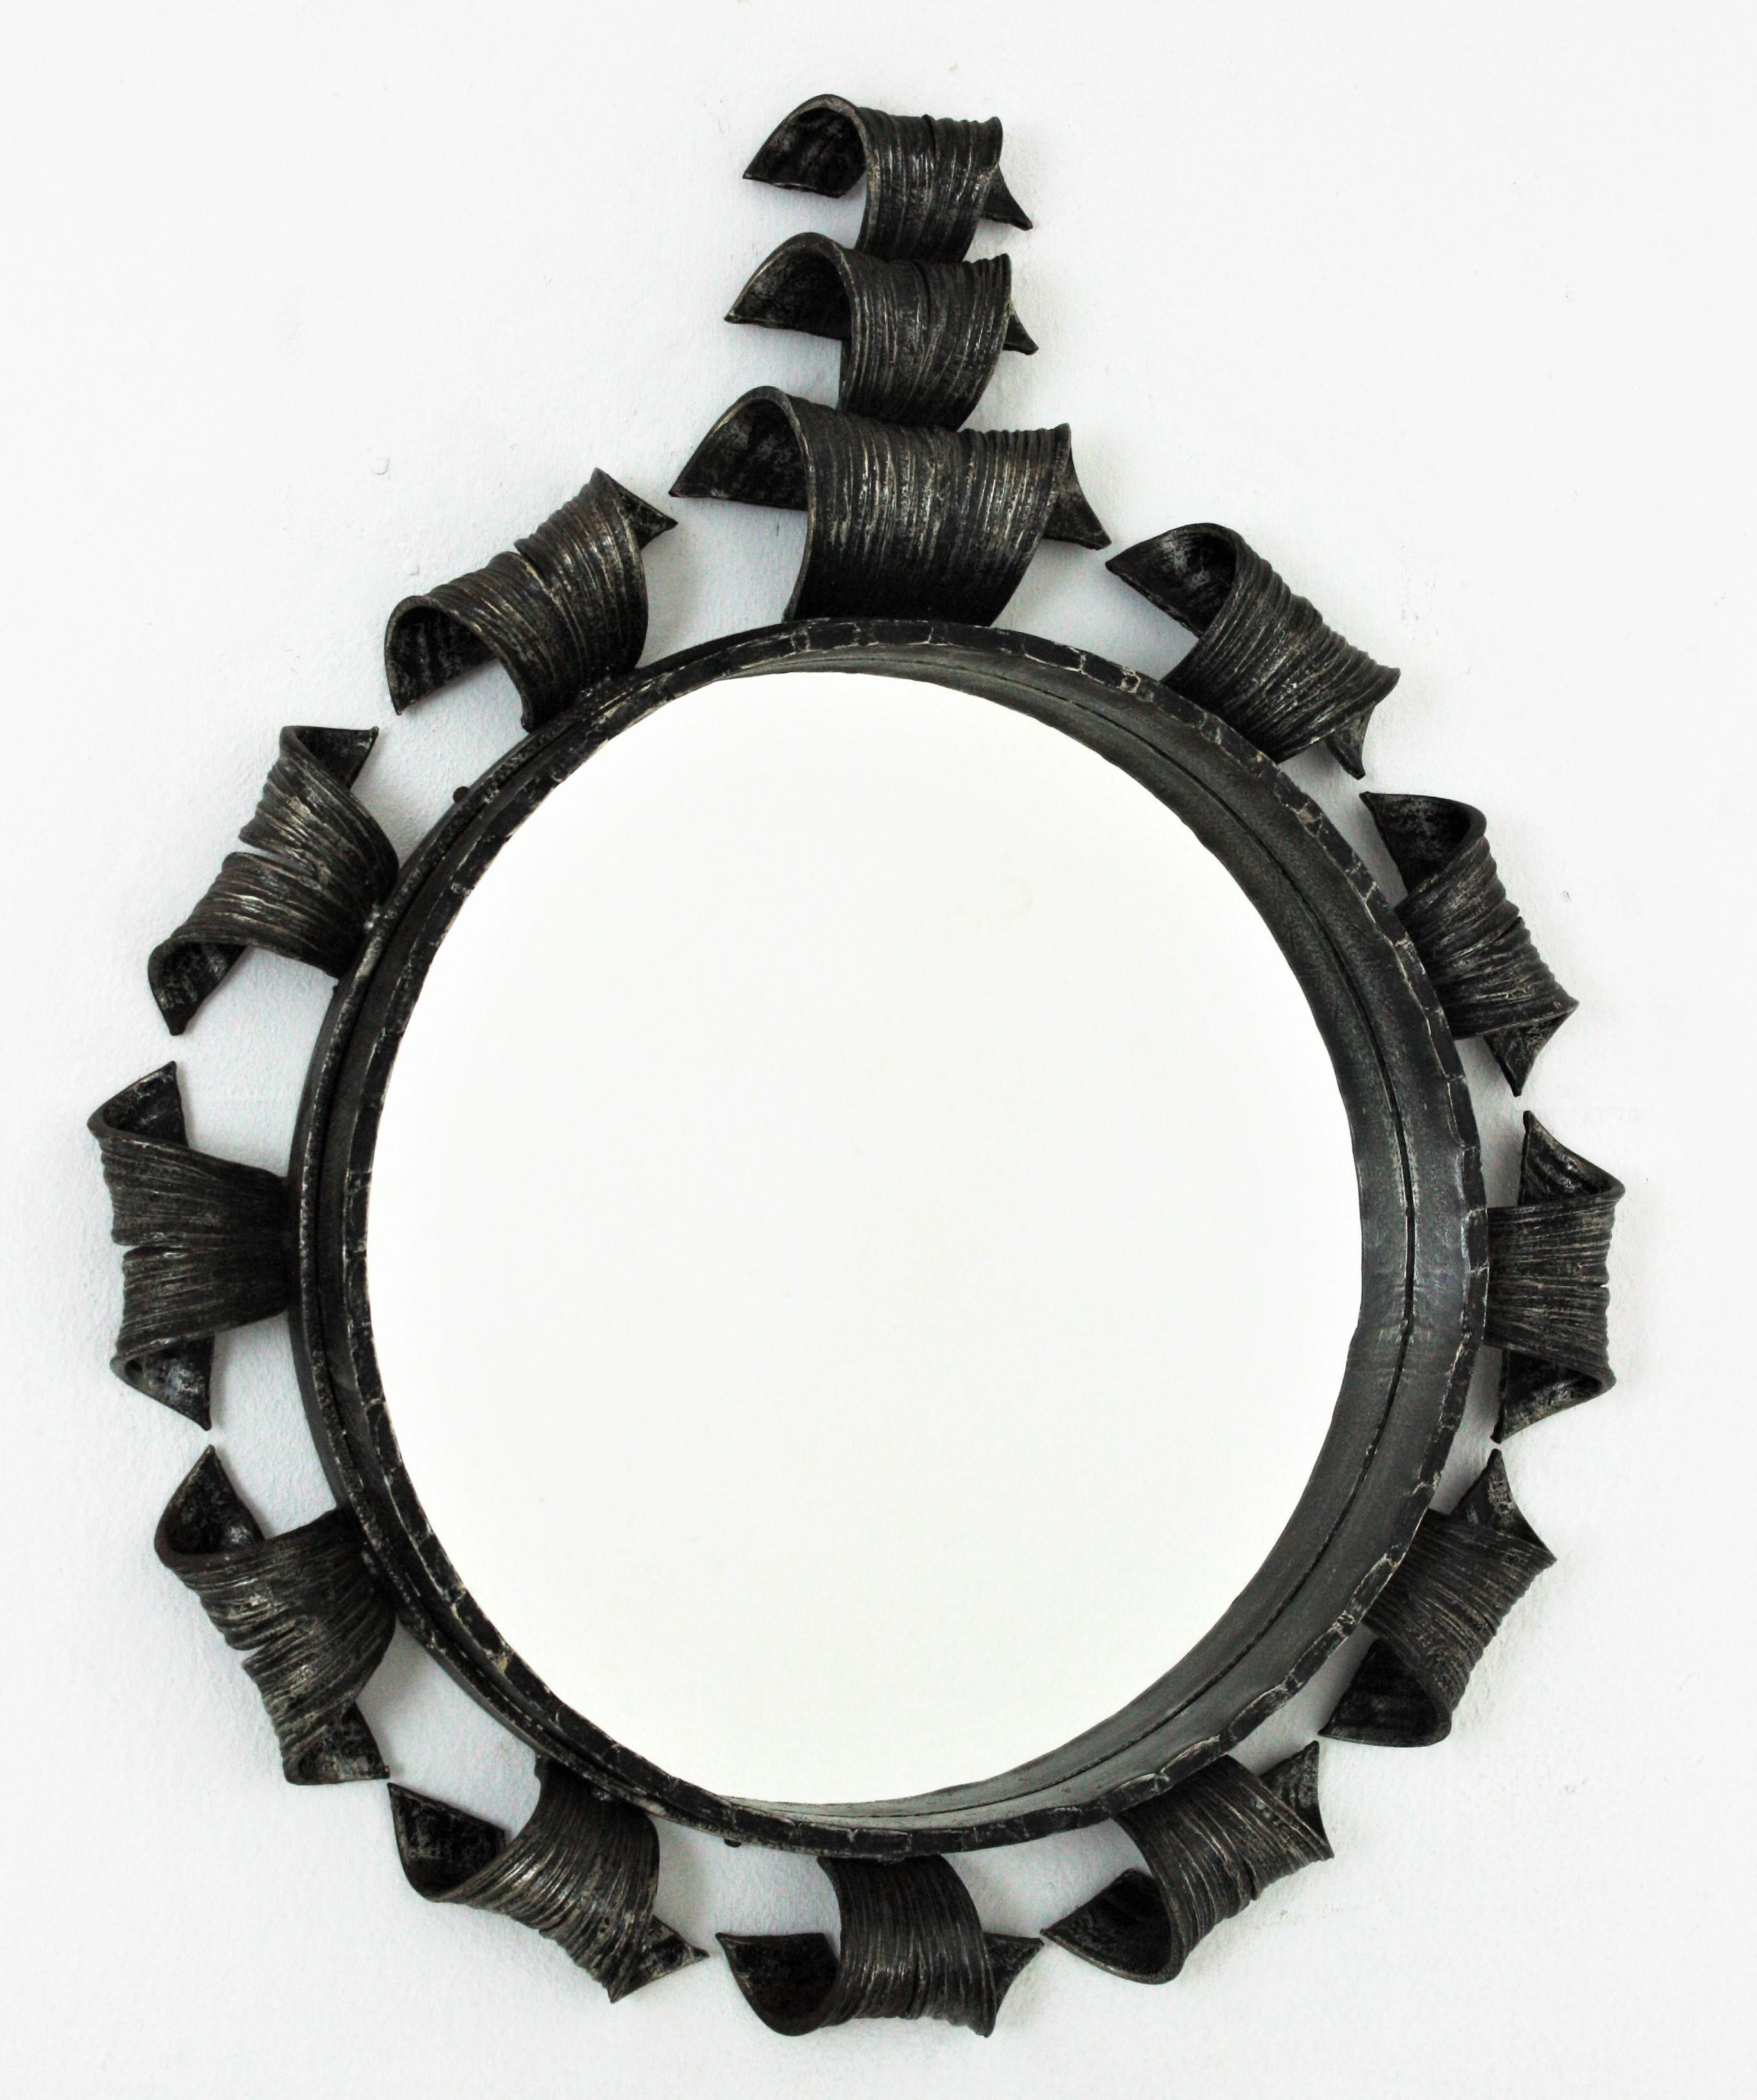 Hand forged iron round mirror with scrolled details and crest, Spain, 1960s.
This eye-catching mirror is entirely made by hand. Brutalist idesign and a very heavy construction. The frame has thick scrollwork accents patinated in black with a crest